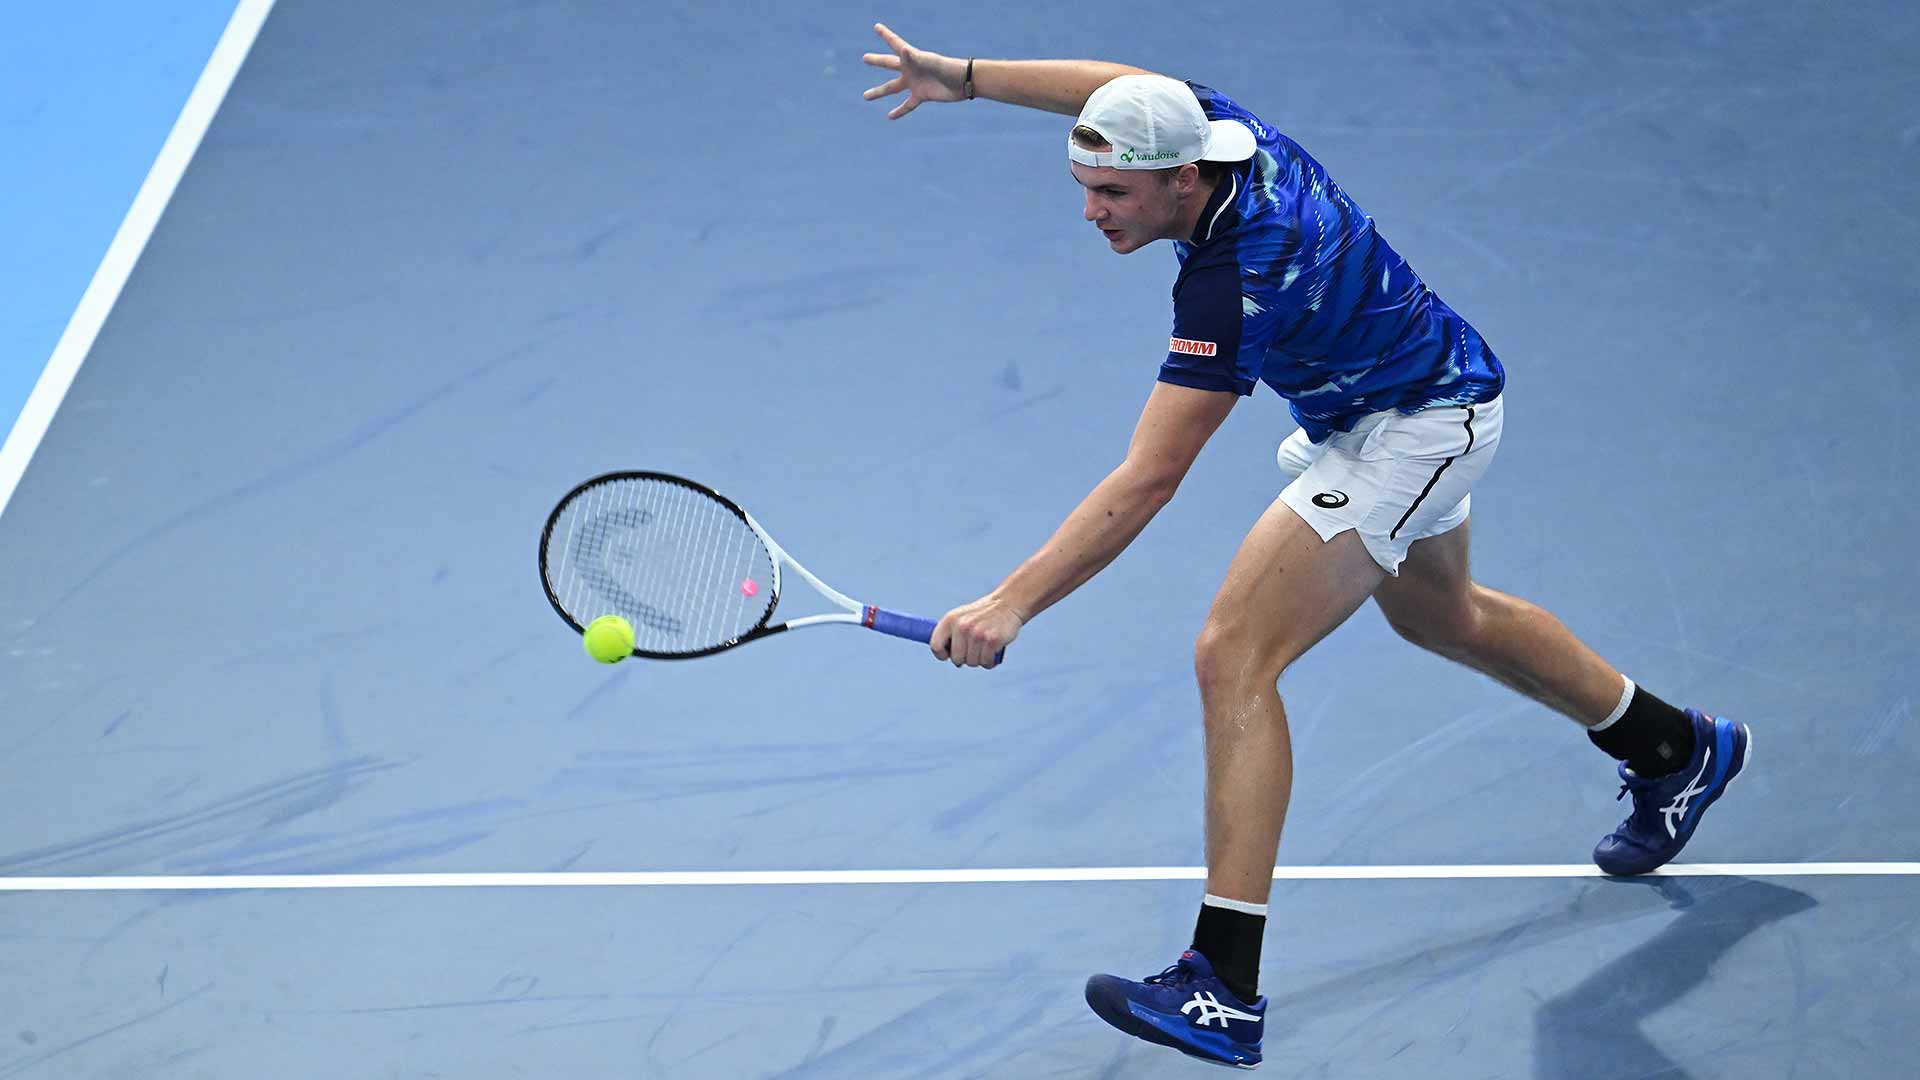 Dominik Stricker reached the second round of qualifying at the majors three times in 2022.